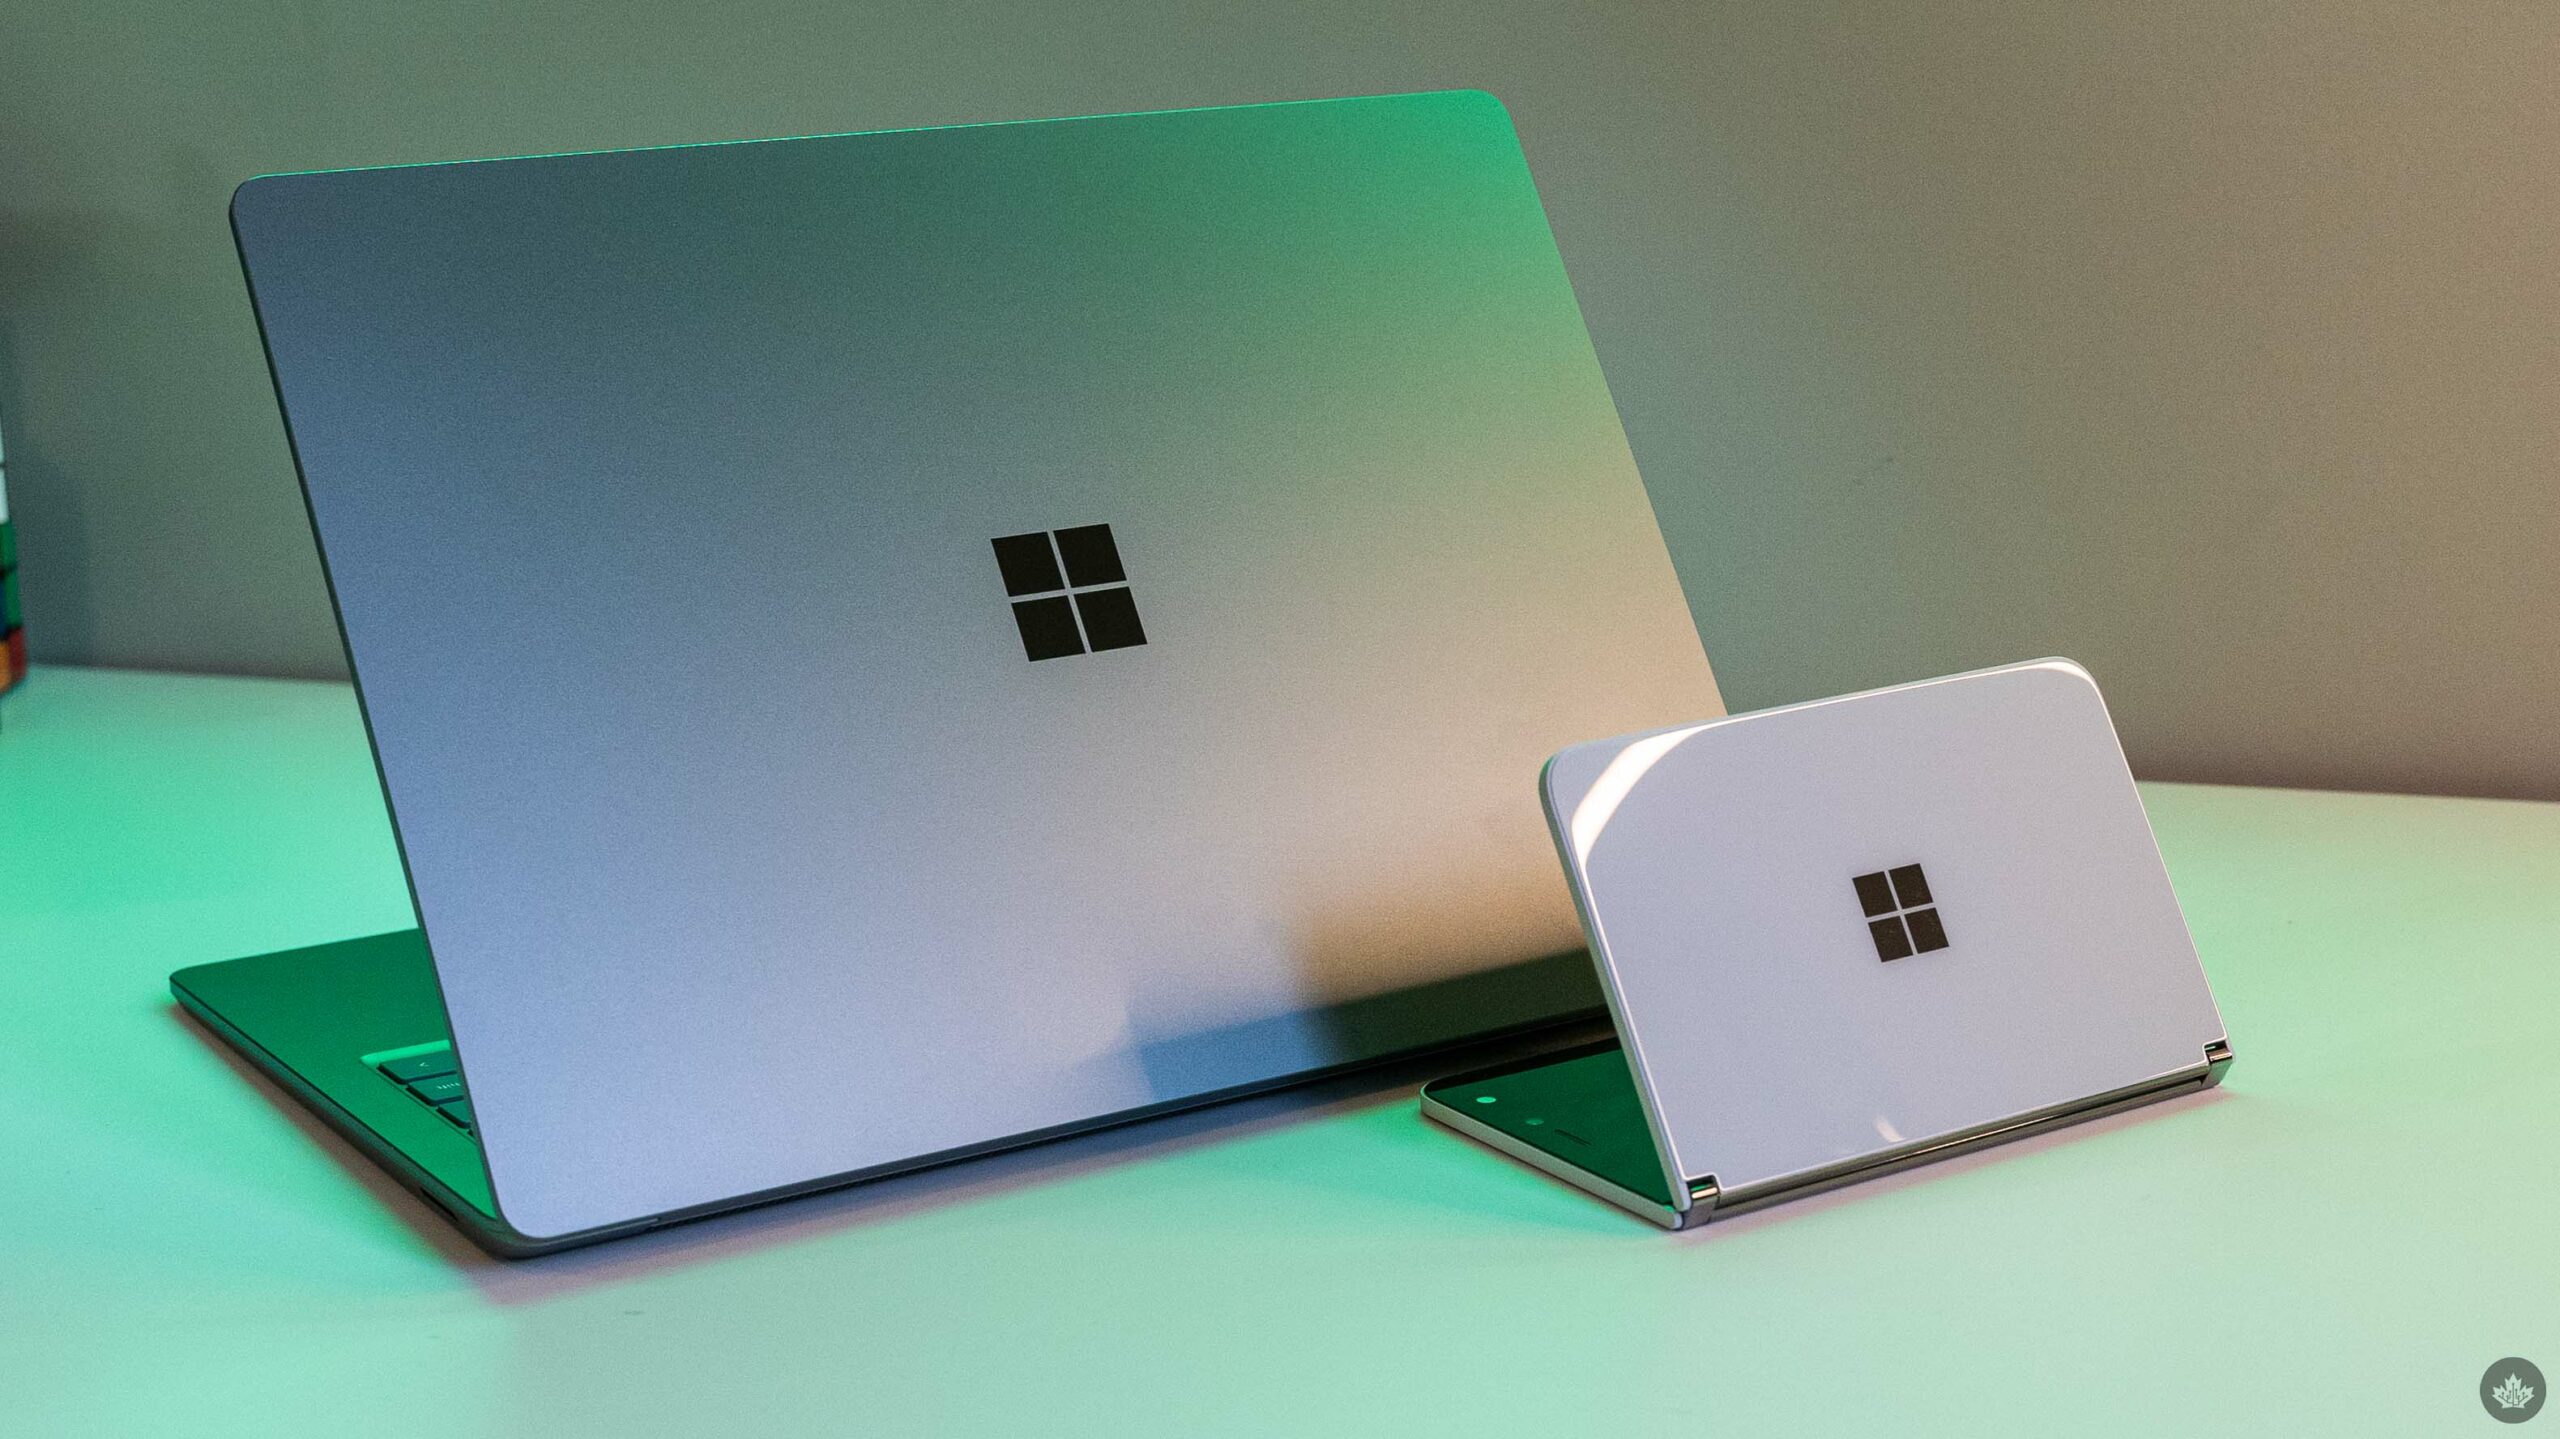 Microsoft to stop selling Windows 10 Home, Pro at end of January